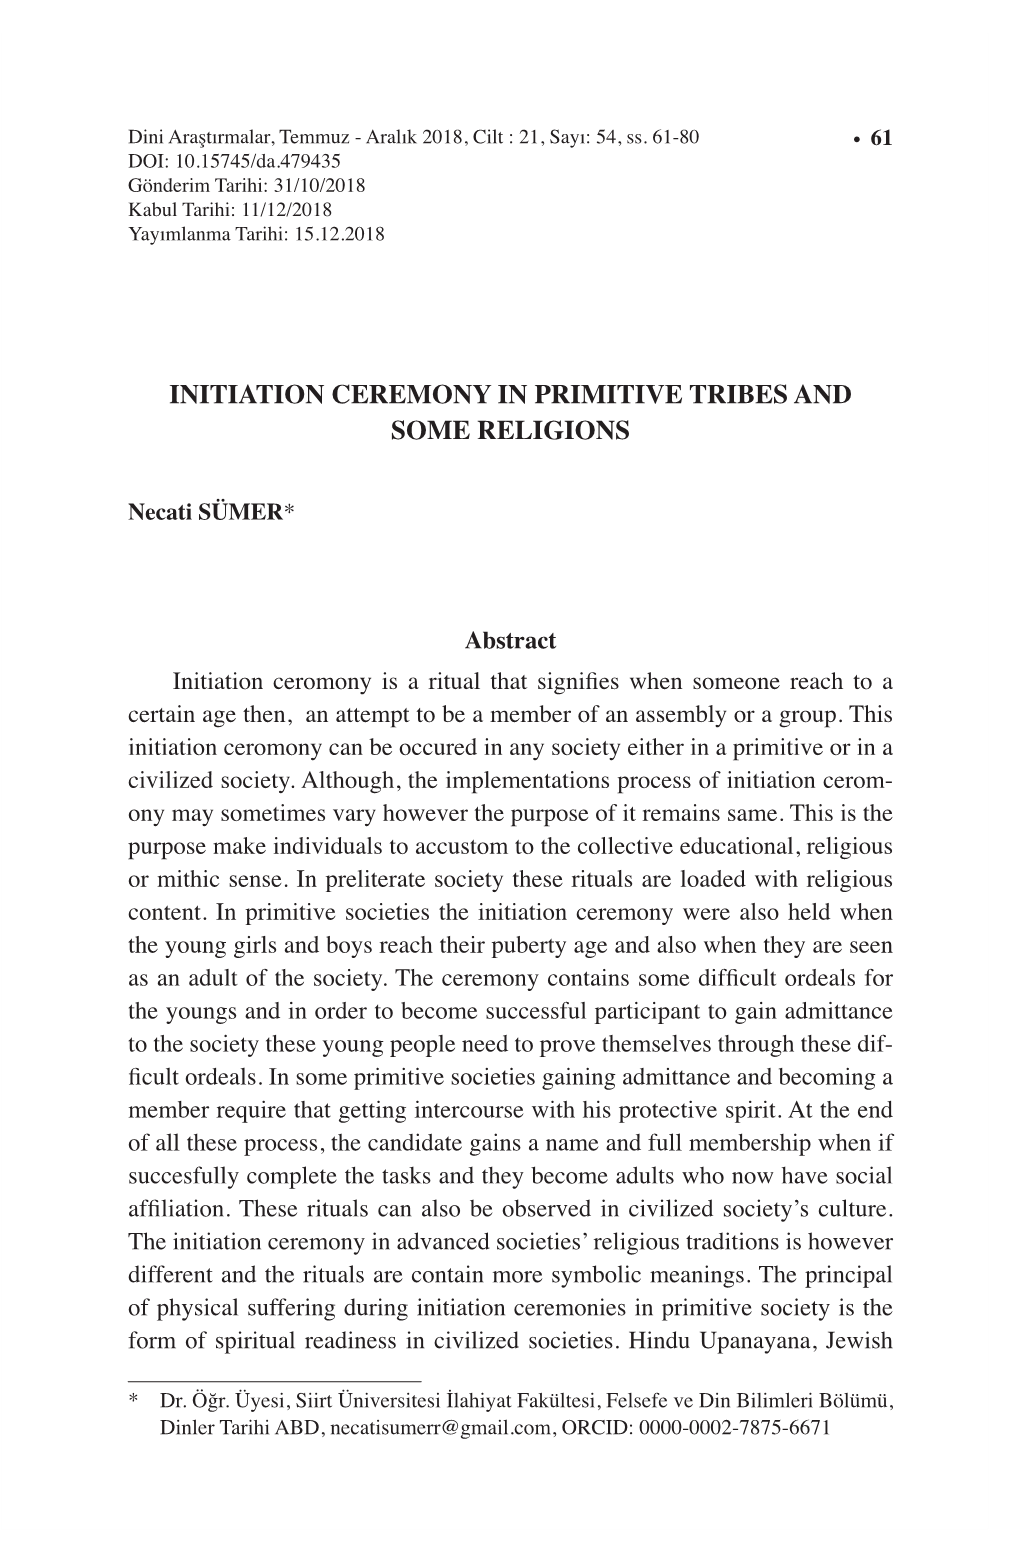 Initiation Ceremony in Primitive Tribes and Some Religions